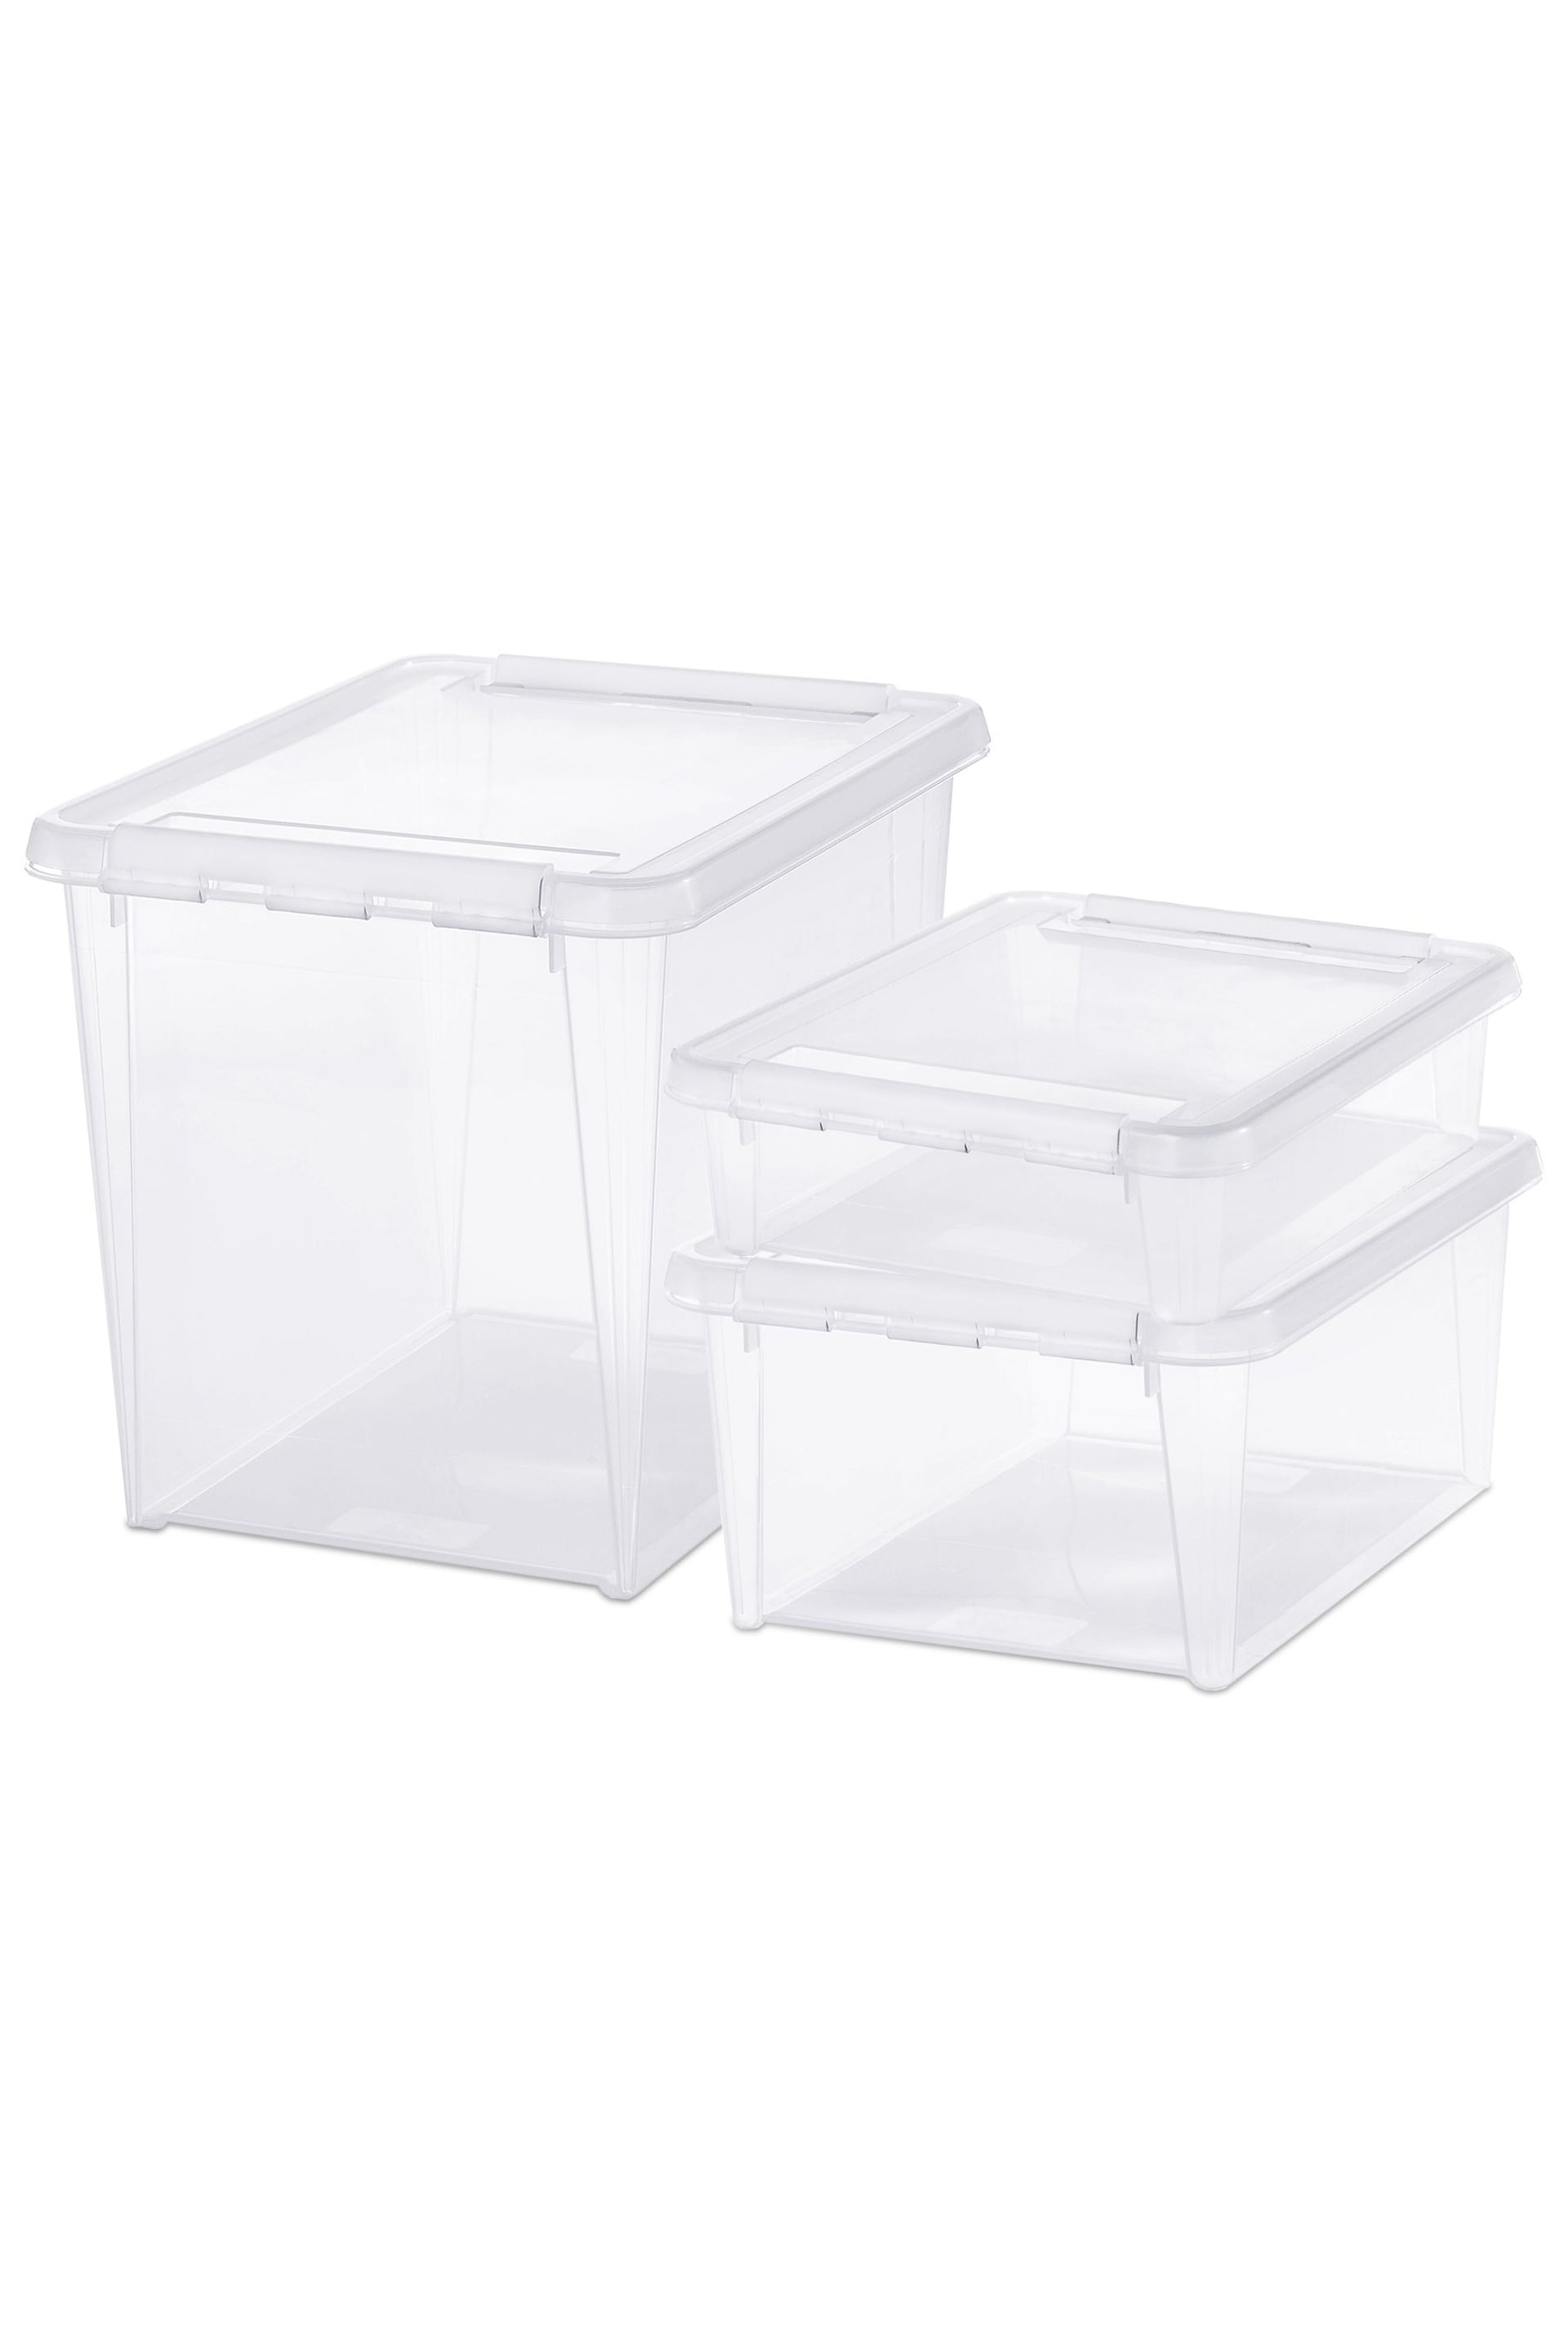 Orthex Clear Smartstore Home 8L,14L & 25L Storage Boxes - Image 5 of 5